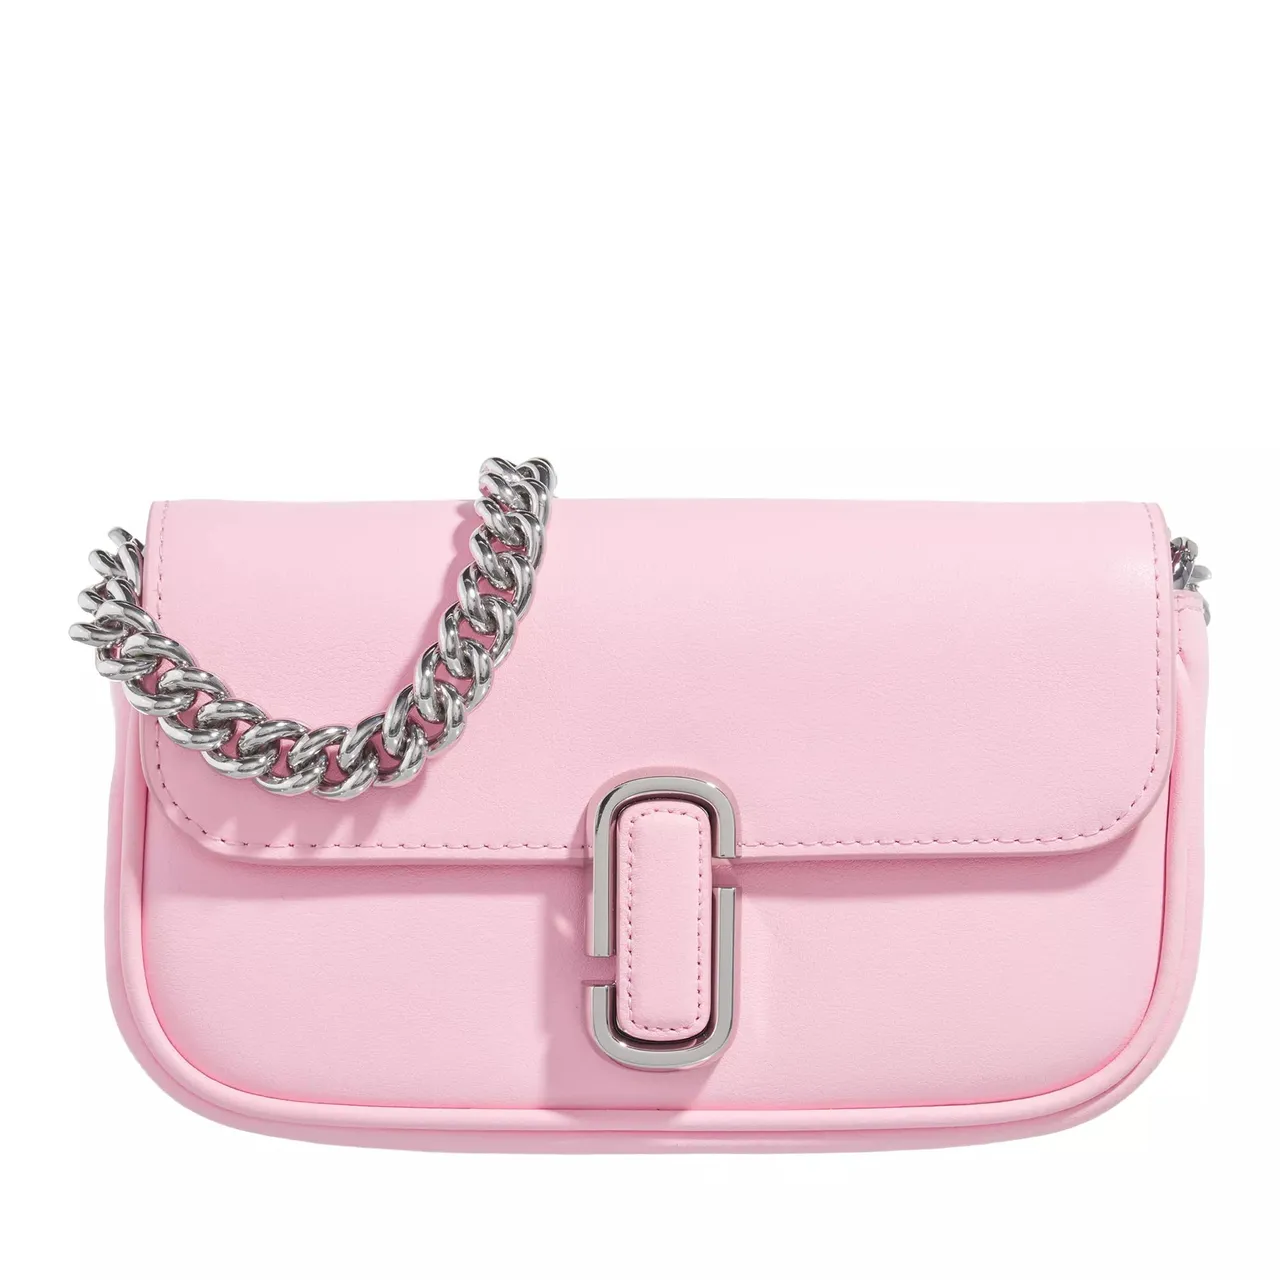 Marc Jacobs Crossbody Bags - Small Shoulder Bag - pink - Crossbody Bags for ladies